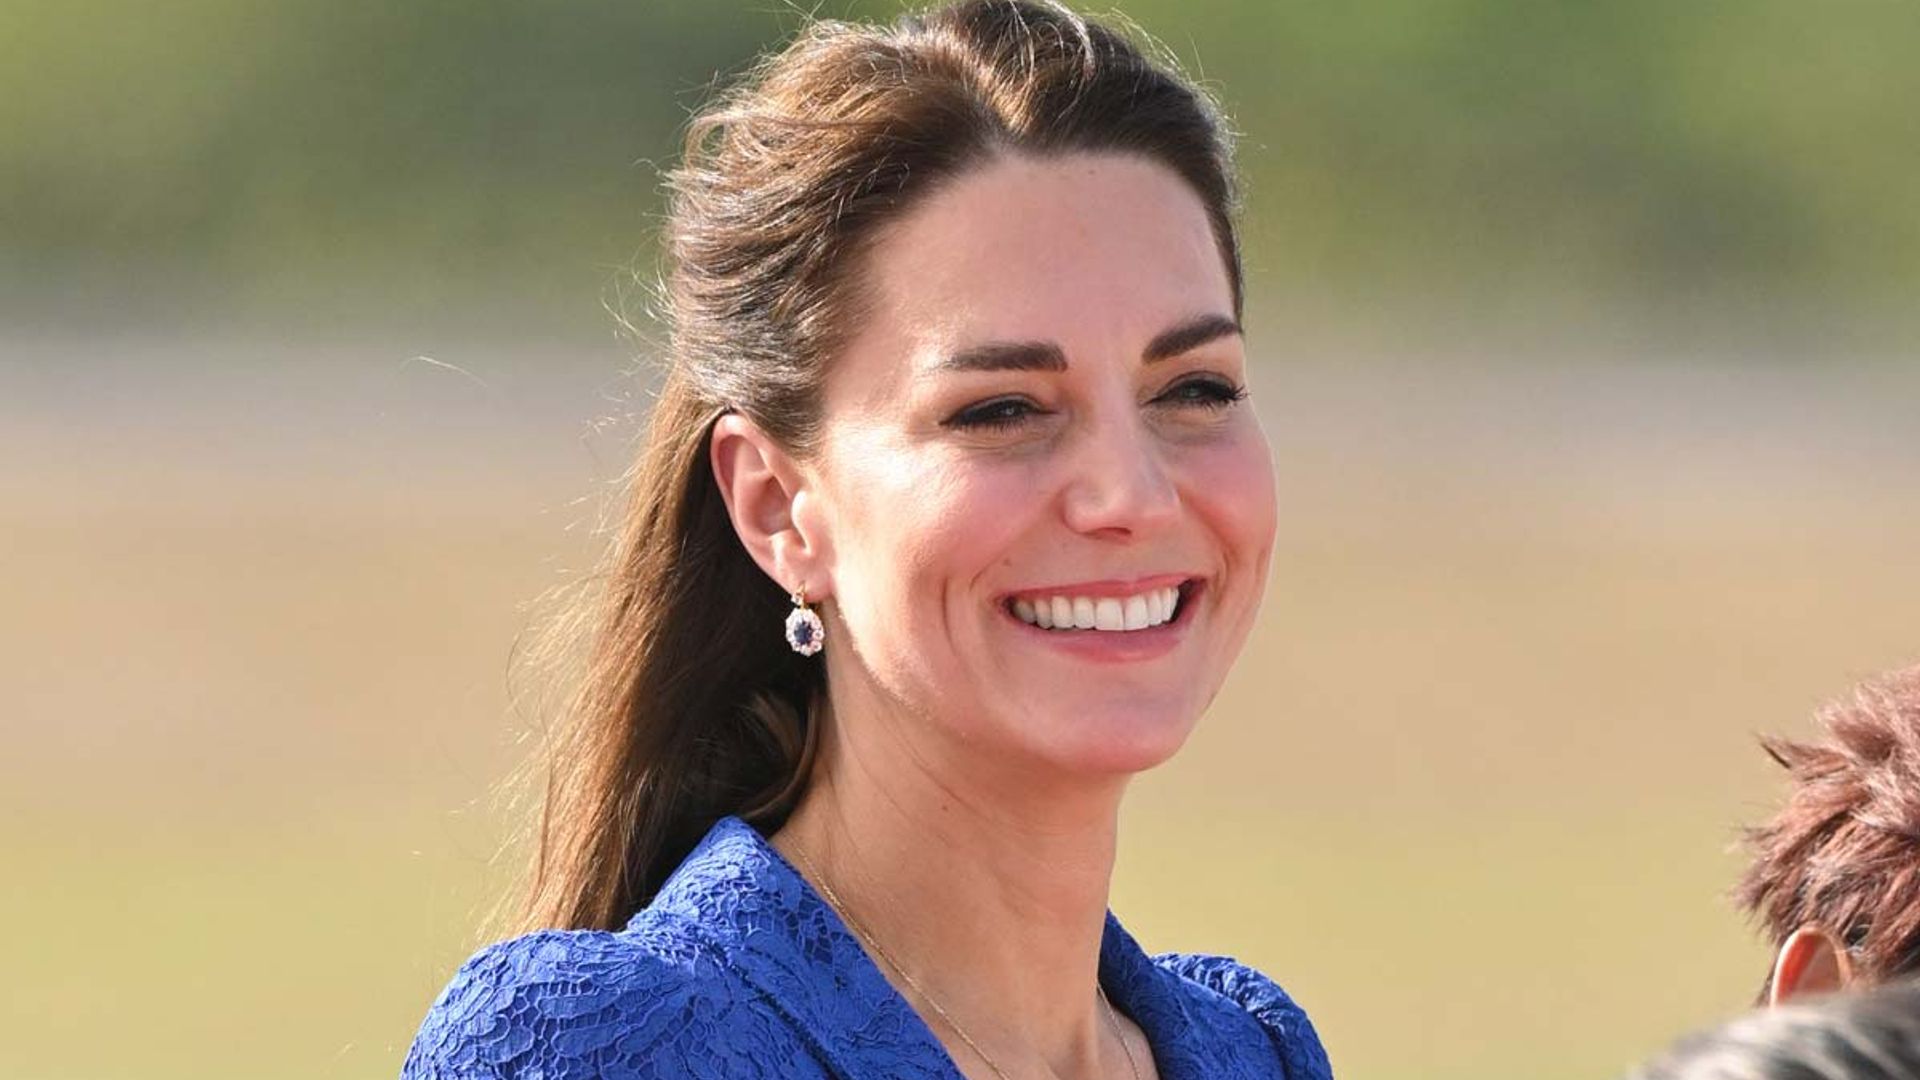 Kate Middleton Nails Her Work Uniform in a Blue Suit Tailored to Perfection